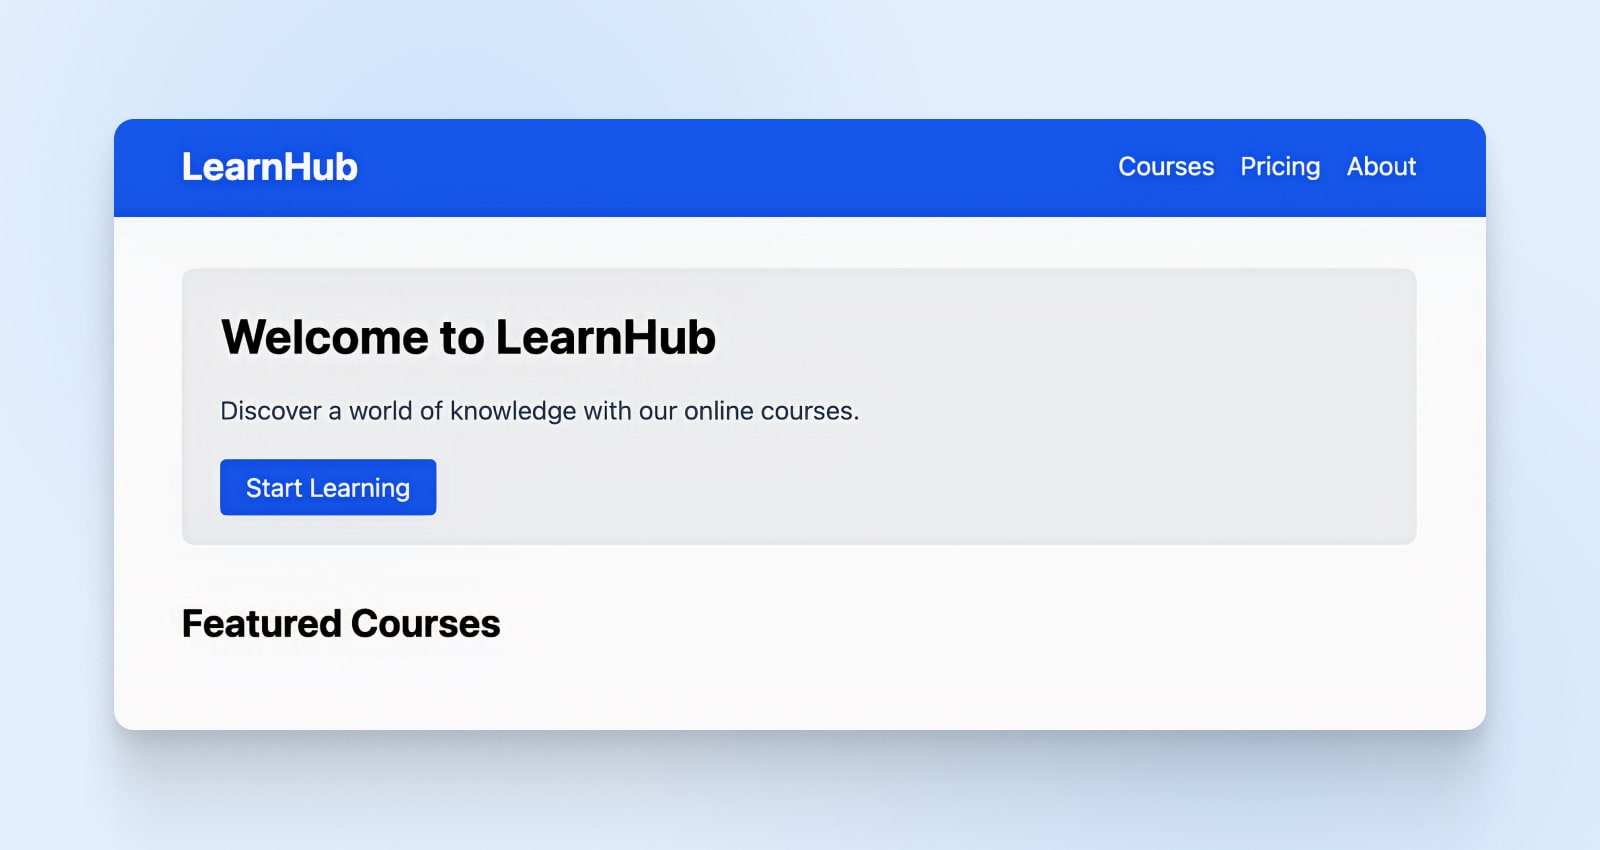 Welcome to LearnHub large, bold heading, a Start Learning blue button below, and Featured Courses in bold. 